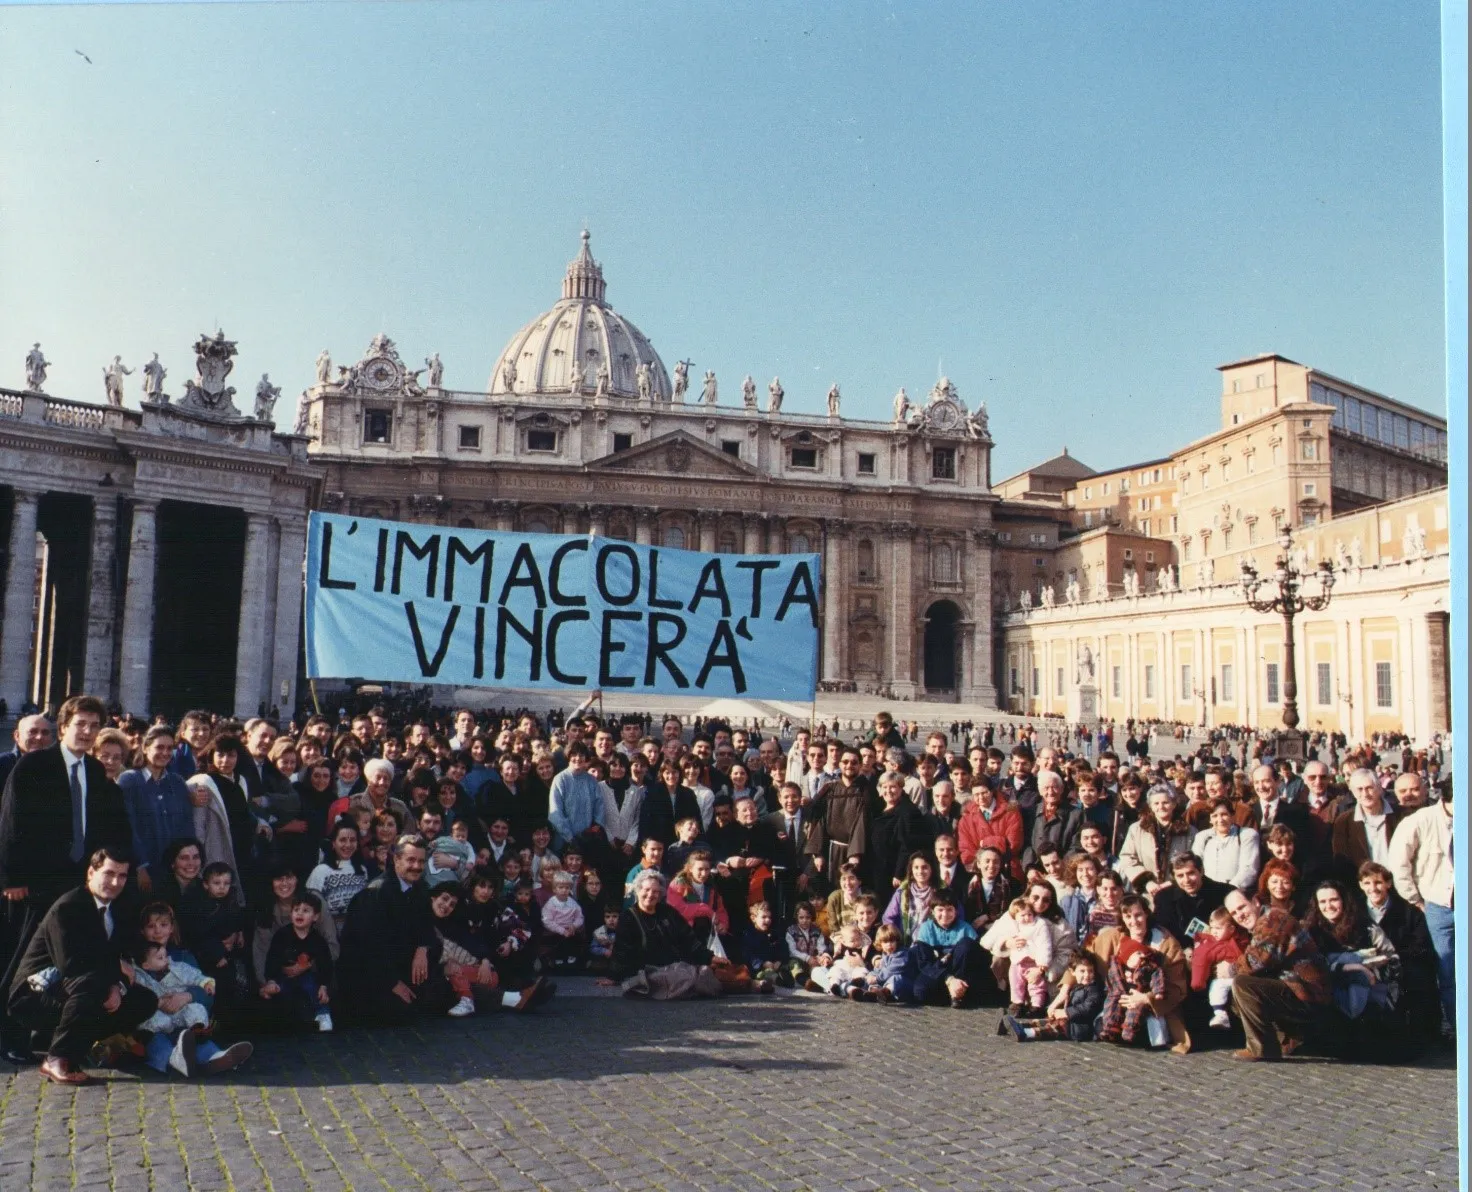 The House of Mary community poses for a photo on Dec. 8, 1994, in St. Peter's Square, the first time they brought their blue banner with the words "The Immaculate Conception will Triumph" to the Angelus with Pope John Paul II. The group has continued to bring the banner to every Sunday Angelus for 29 years.?w=200&h=150